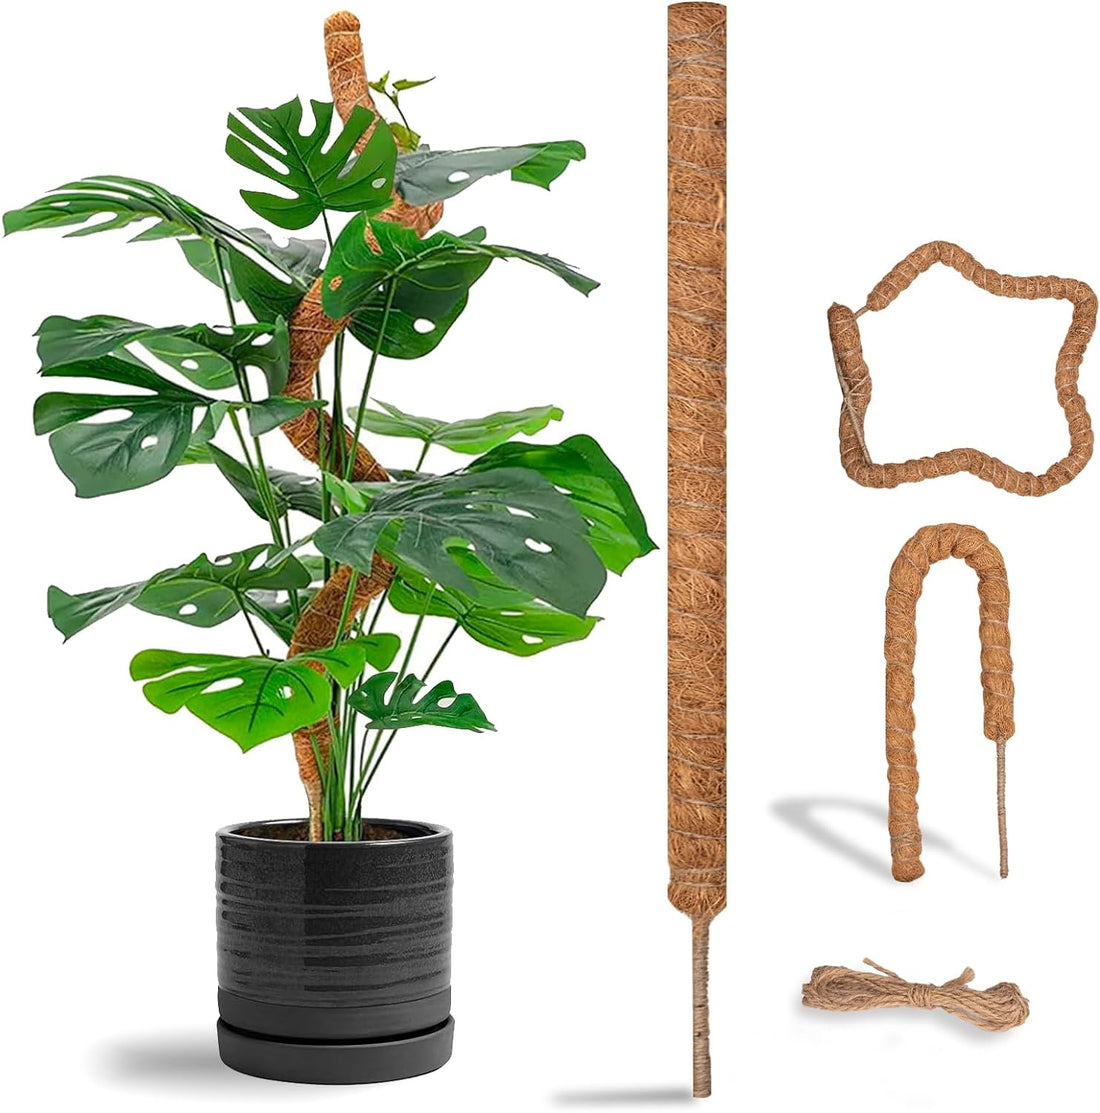 Moss Poles for Plants Monstera Reviews